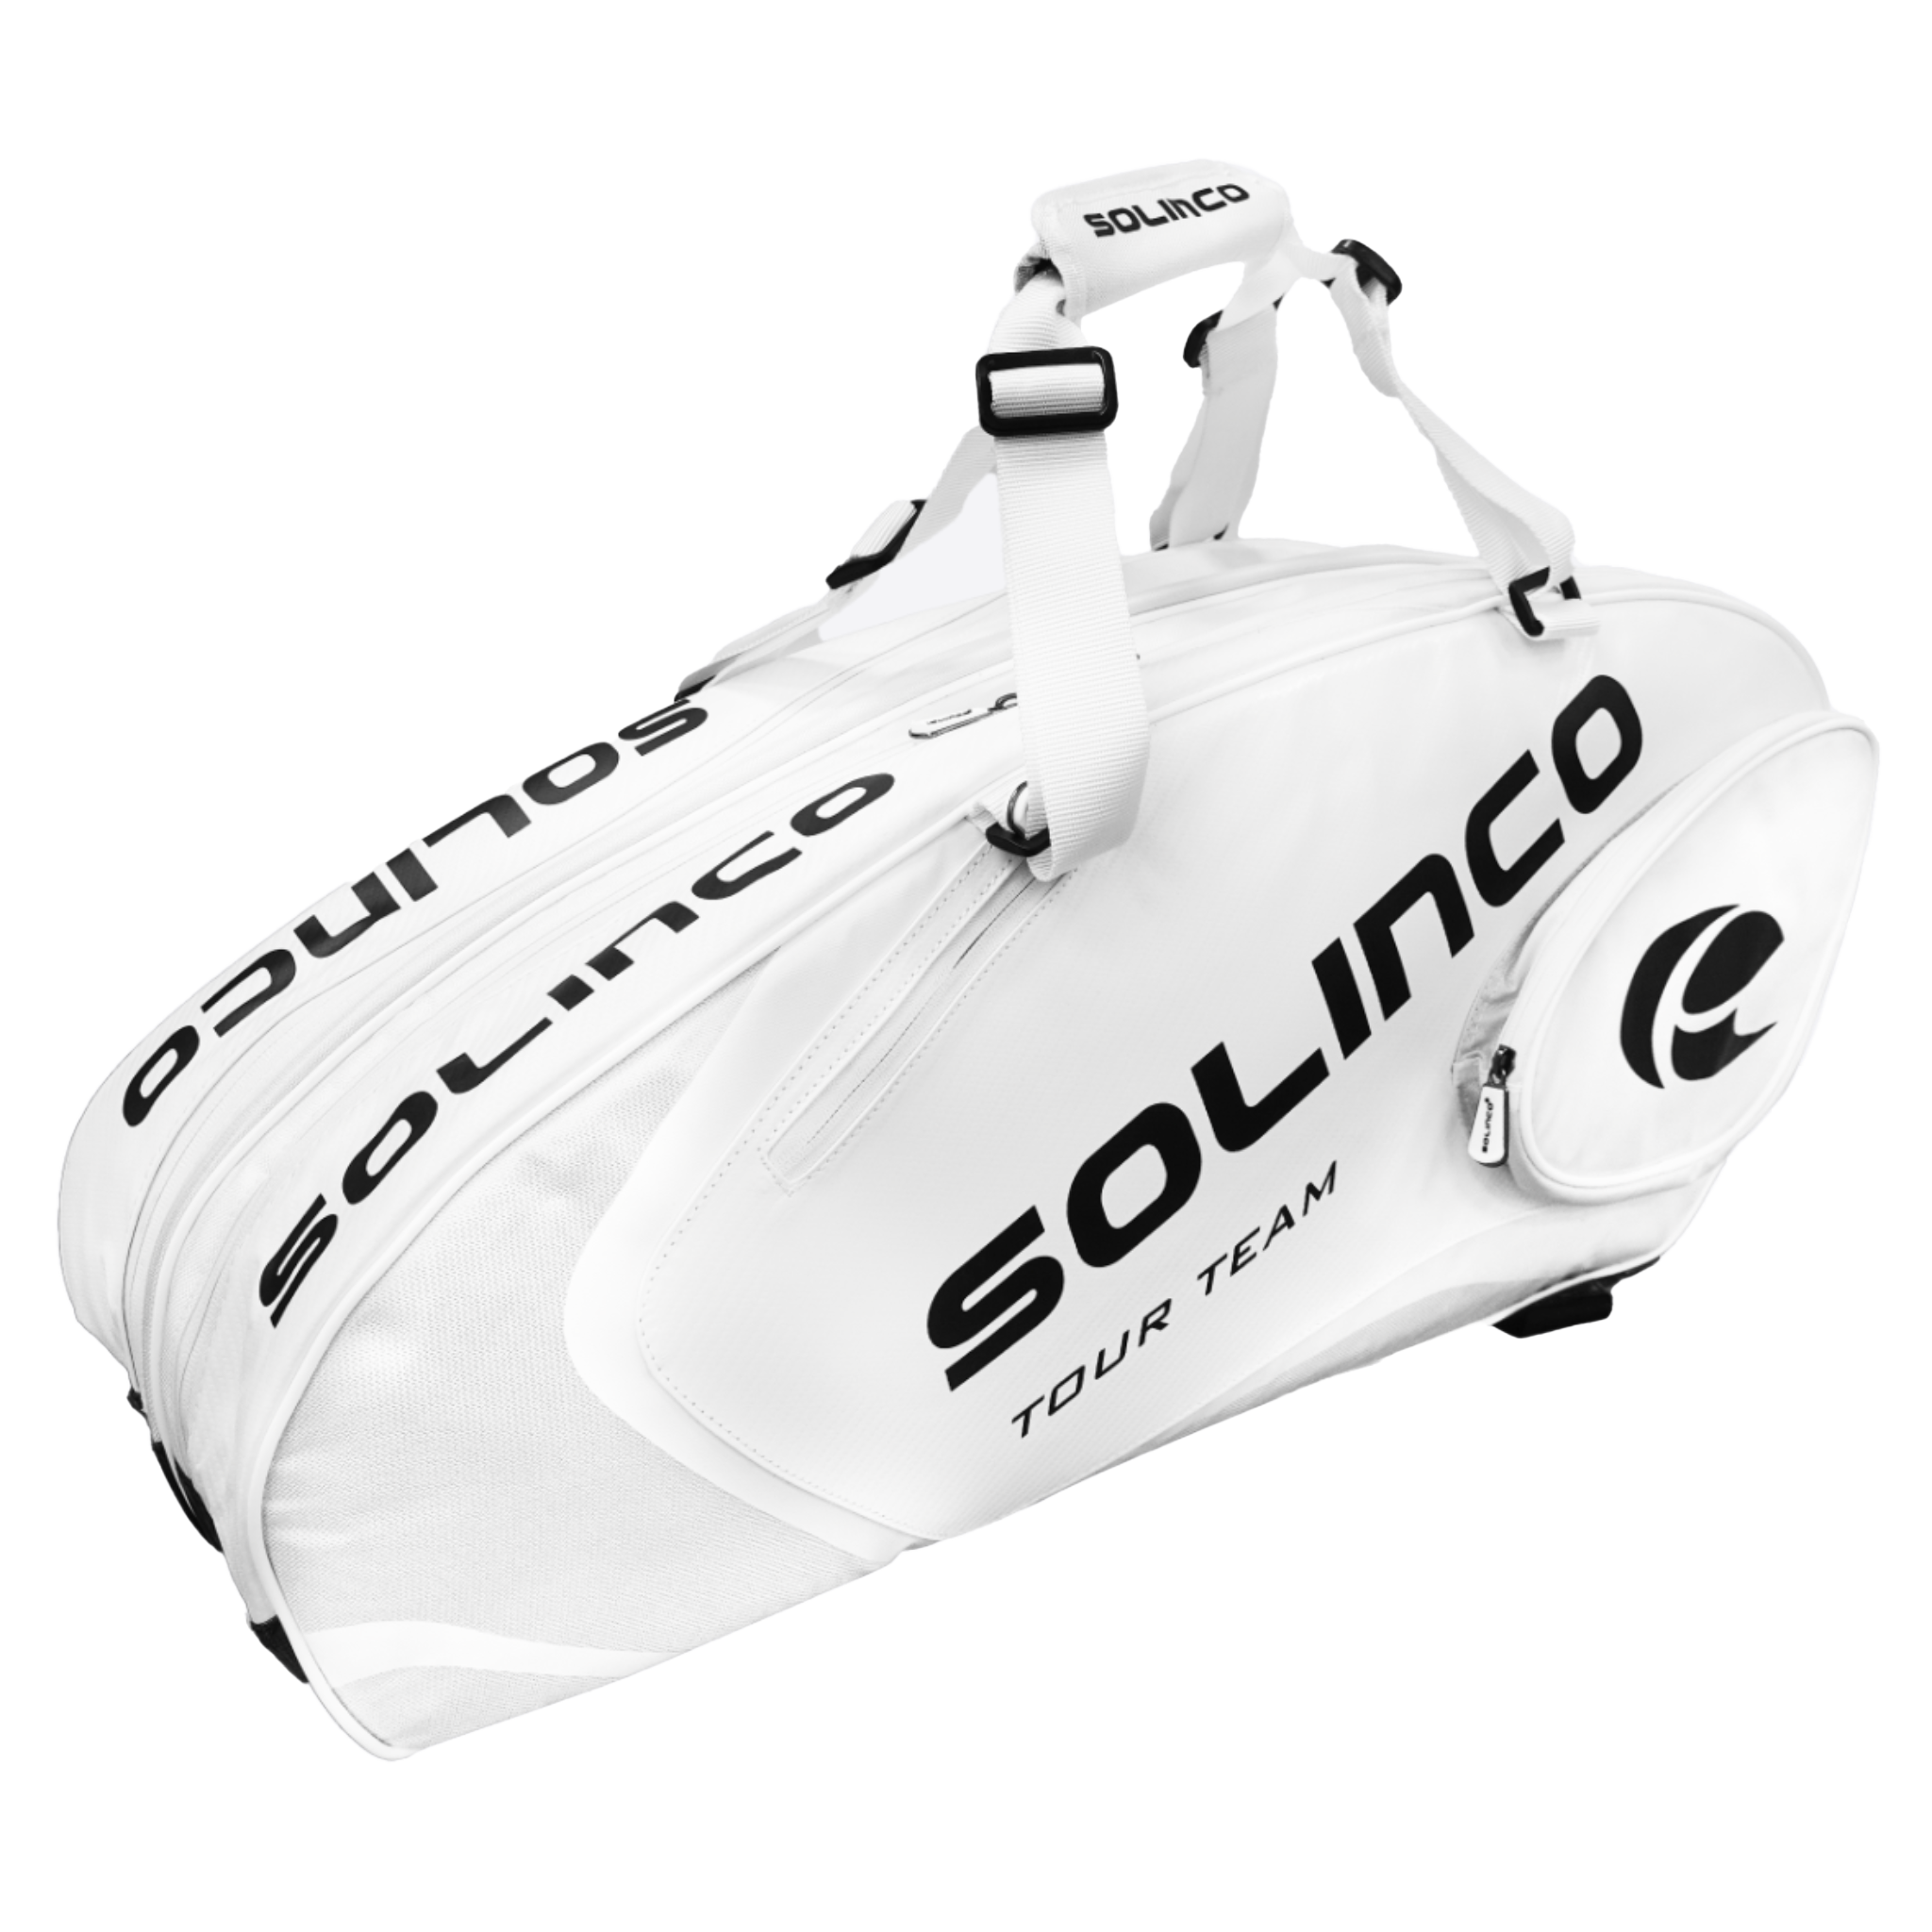 Solinco 6-Pack Tour Bag > Whiteout